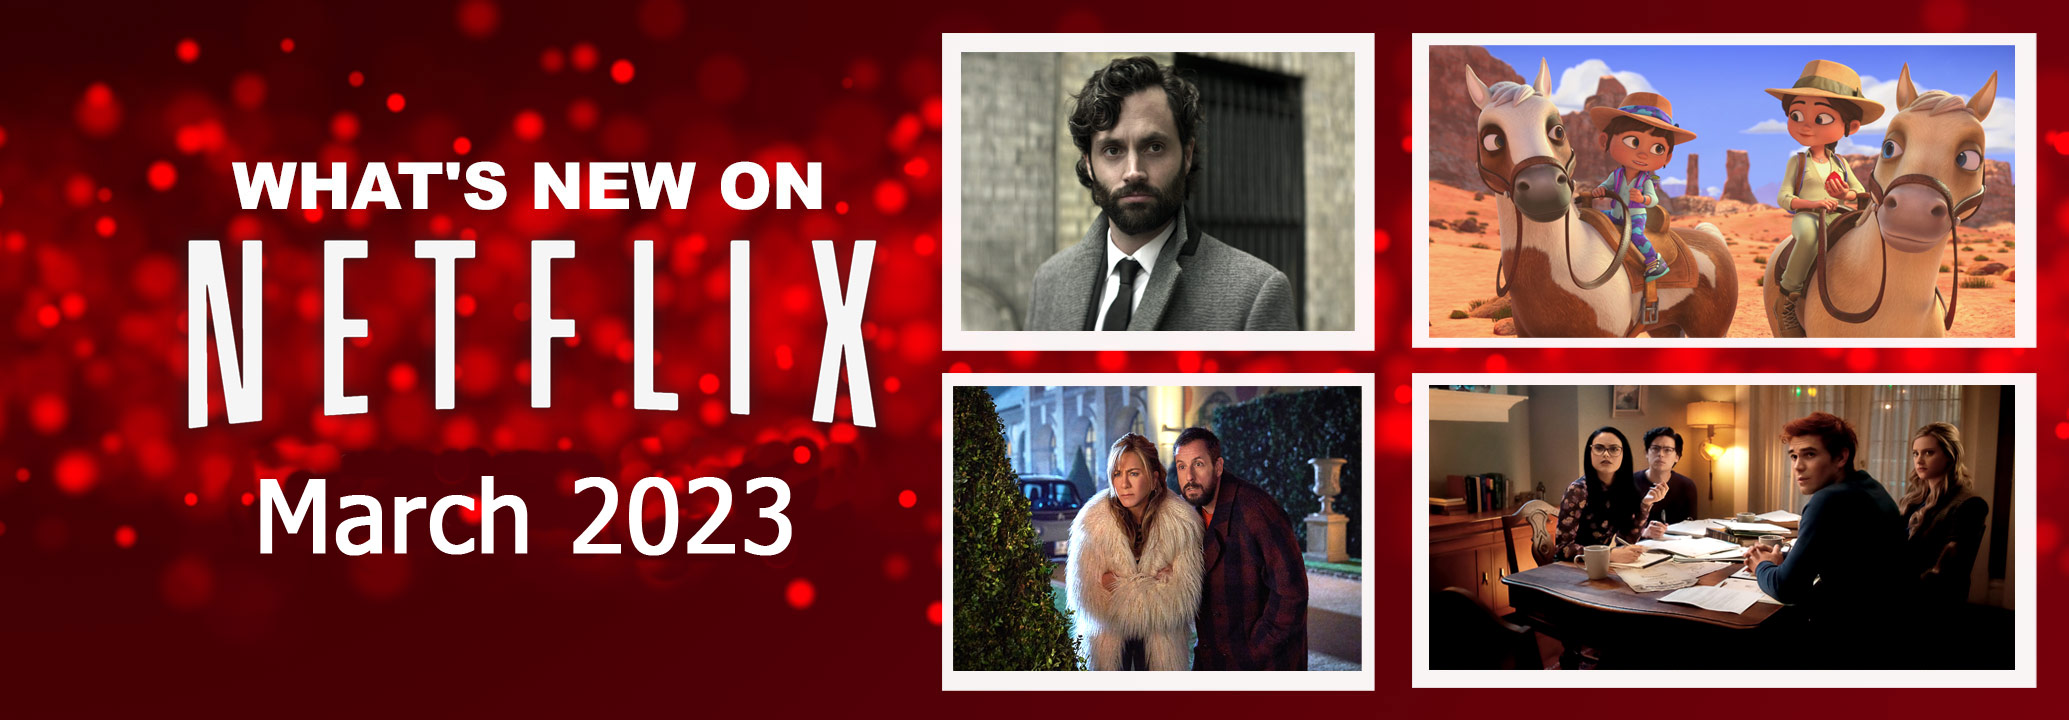 What’s New on Netflix March 2023 « Celebrity Gossip and Movie News